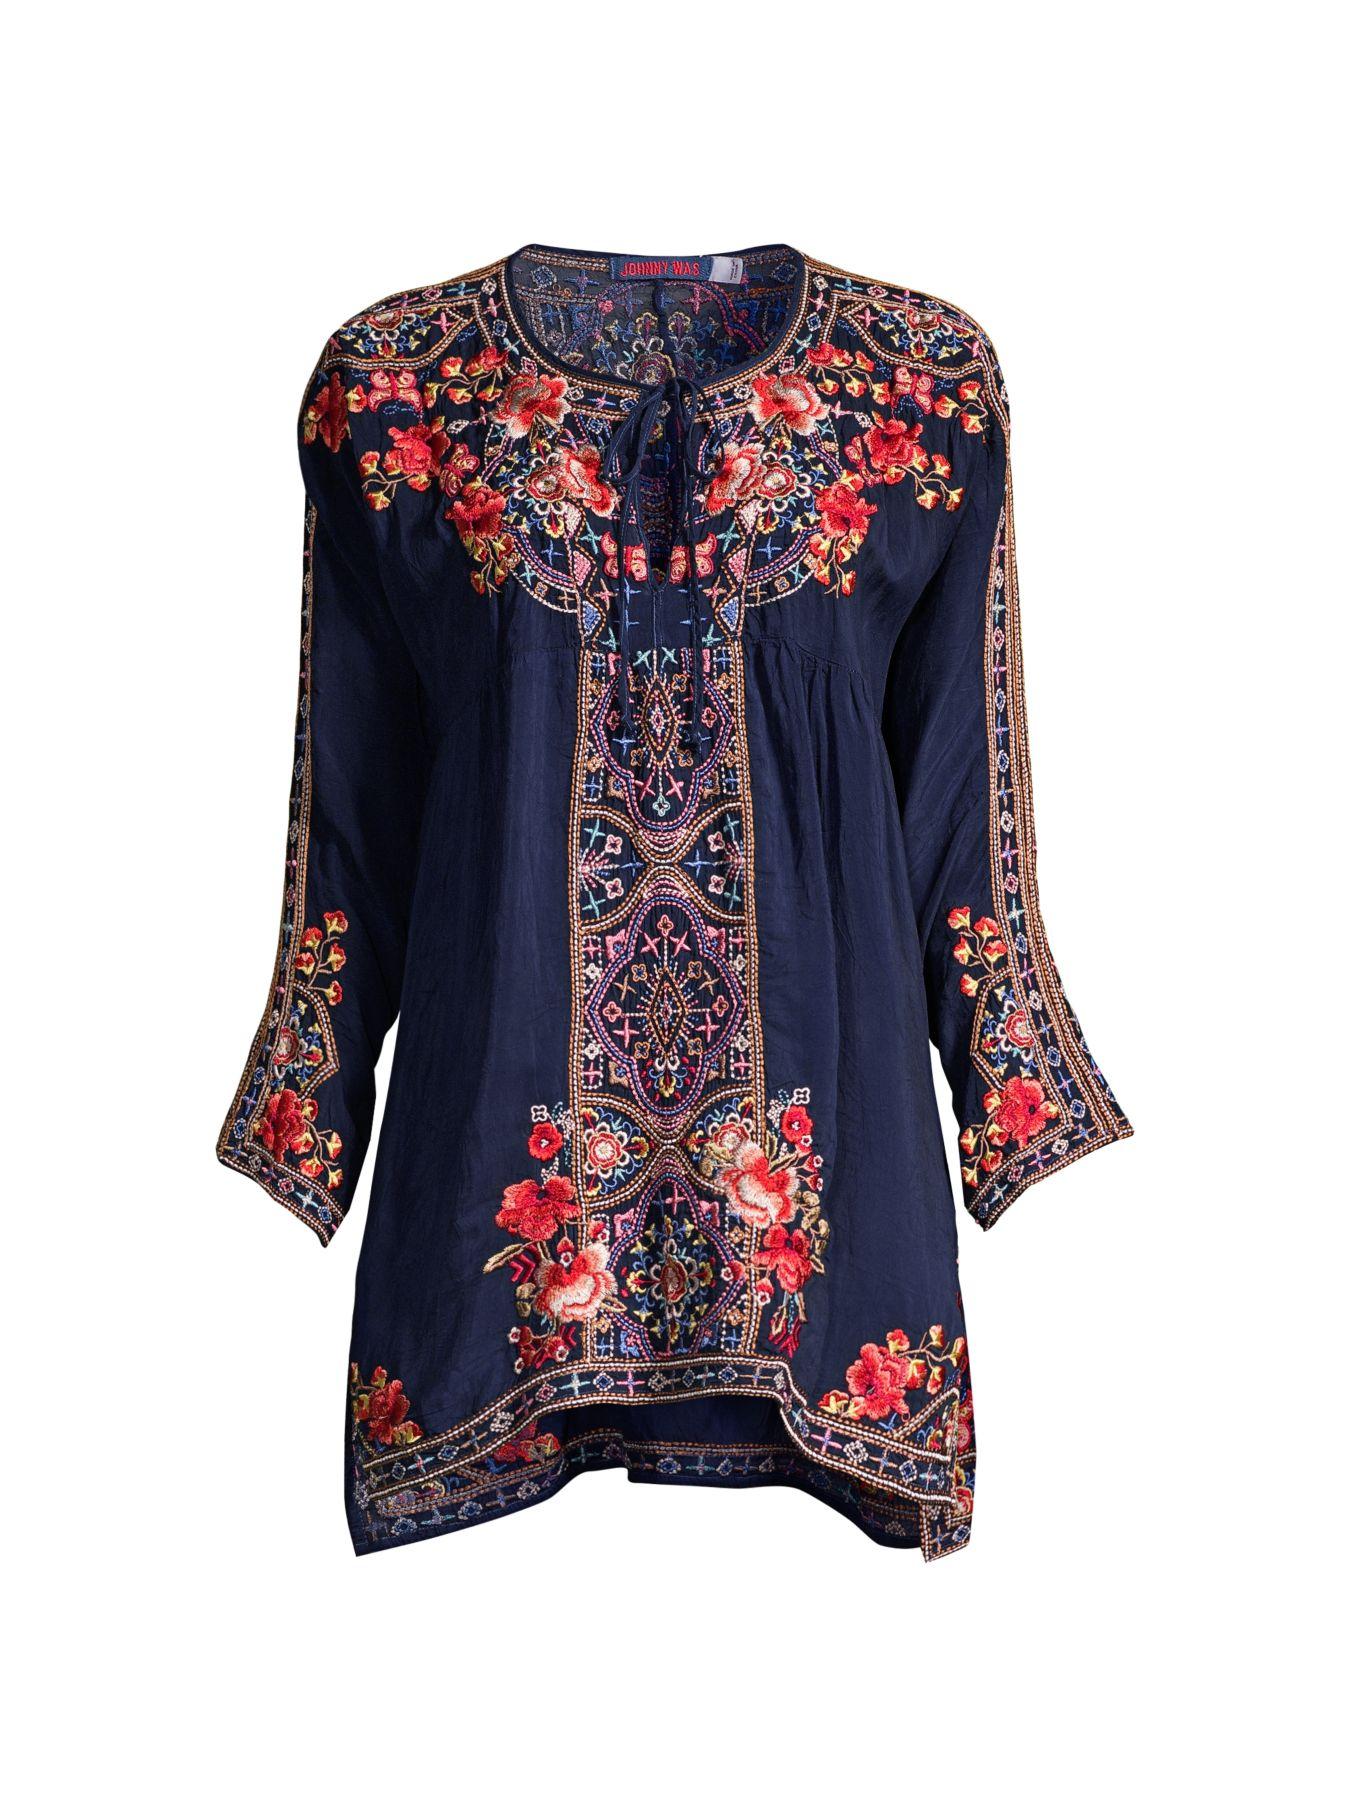 Johnny Was Alora Embroidered Peasant Blouse in Blue Night (Blue) - Lyst